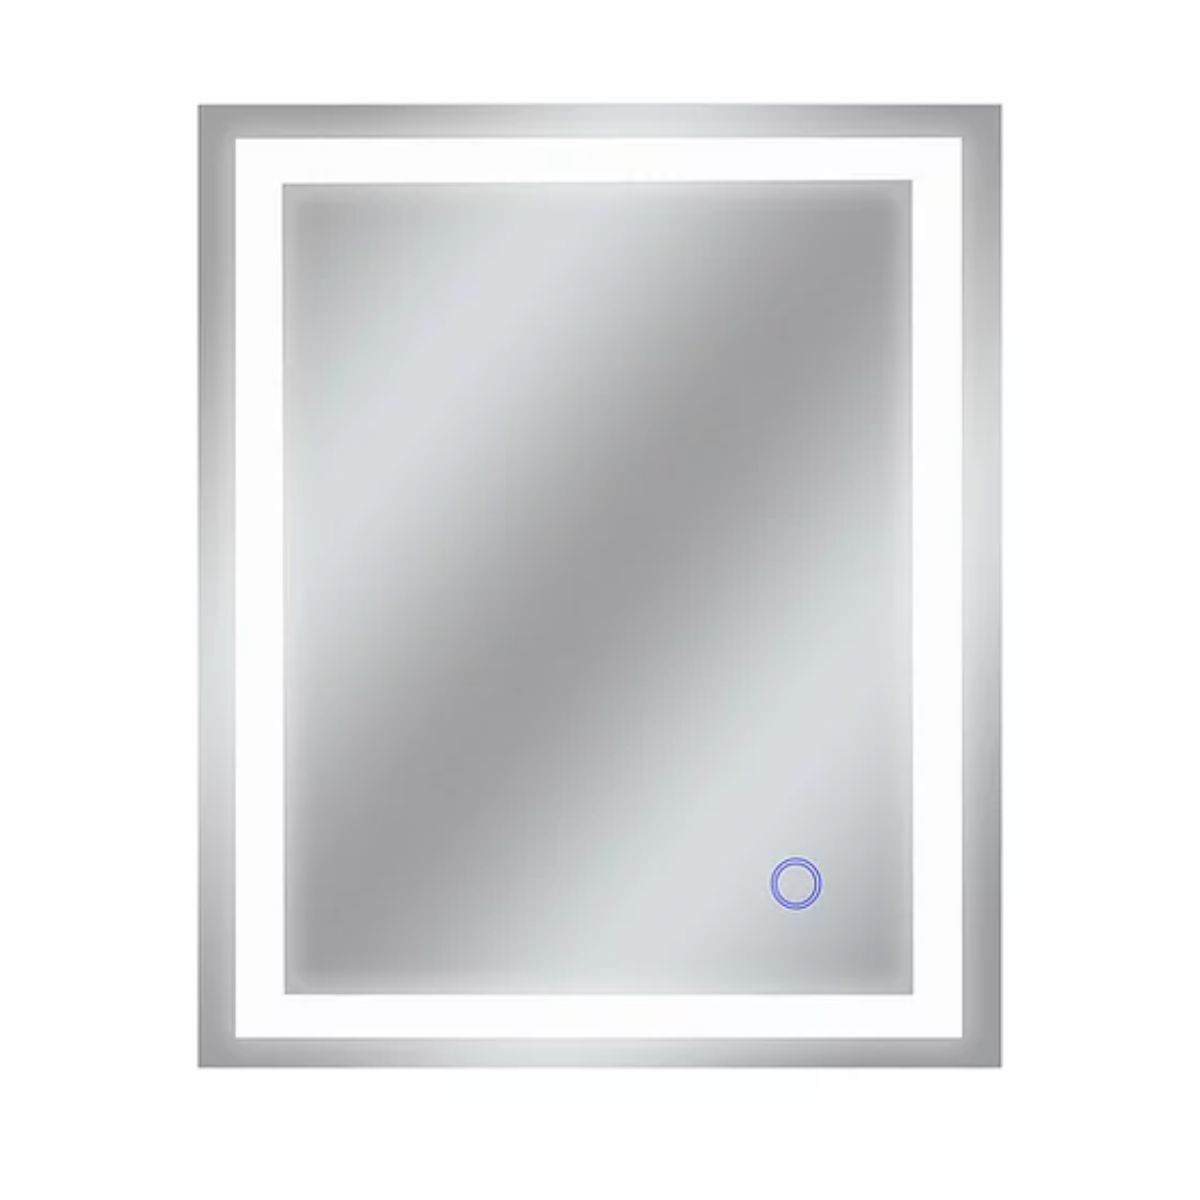 Edison 30 in. x 36 in. LED Wall Mirror with Touch On/Off Dimmer Function